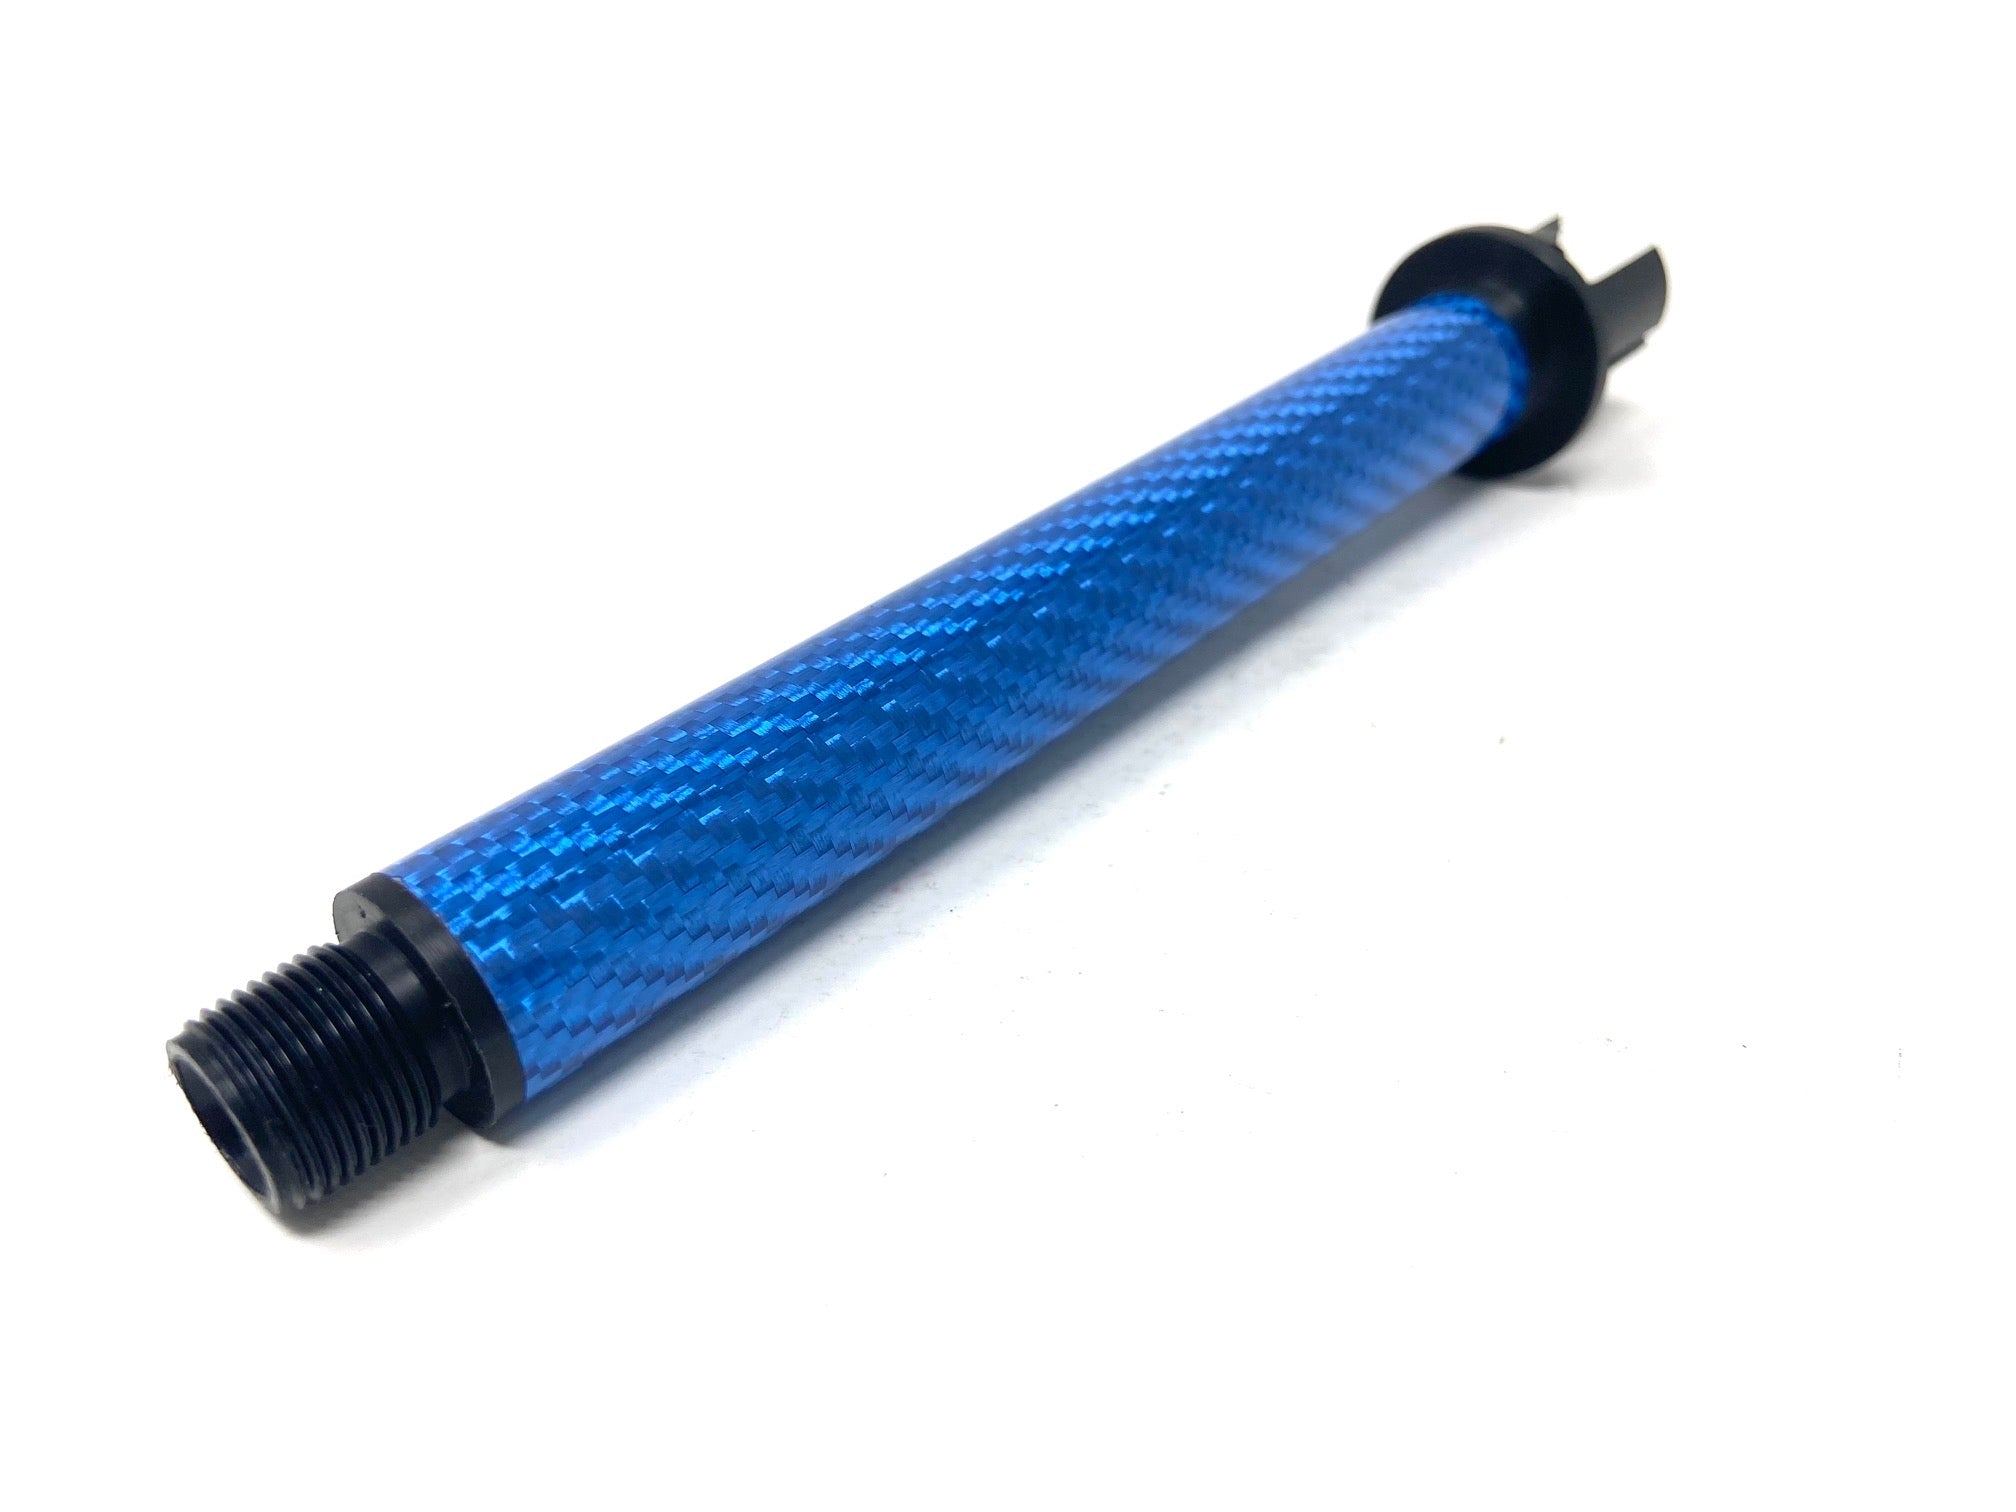 This MAC Custom Airosft XL Pom carbon fiber outer barrel is the perfect, lightweight alternative to standard ste.  Fits most M4 style rifles.  This model is the 7" version.  This replaces your stock outer barrel for easy installation.  Deck out your custom gun today with the newest aftermarket accessories in the game! Let's Get It!